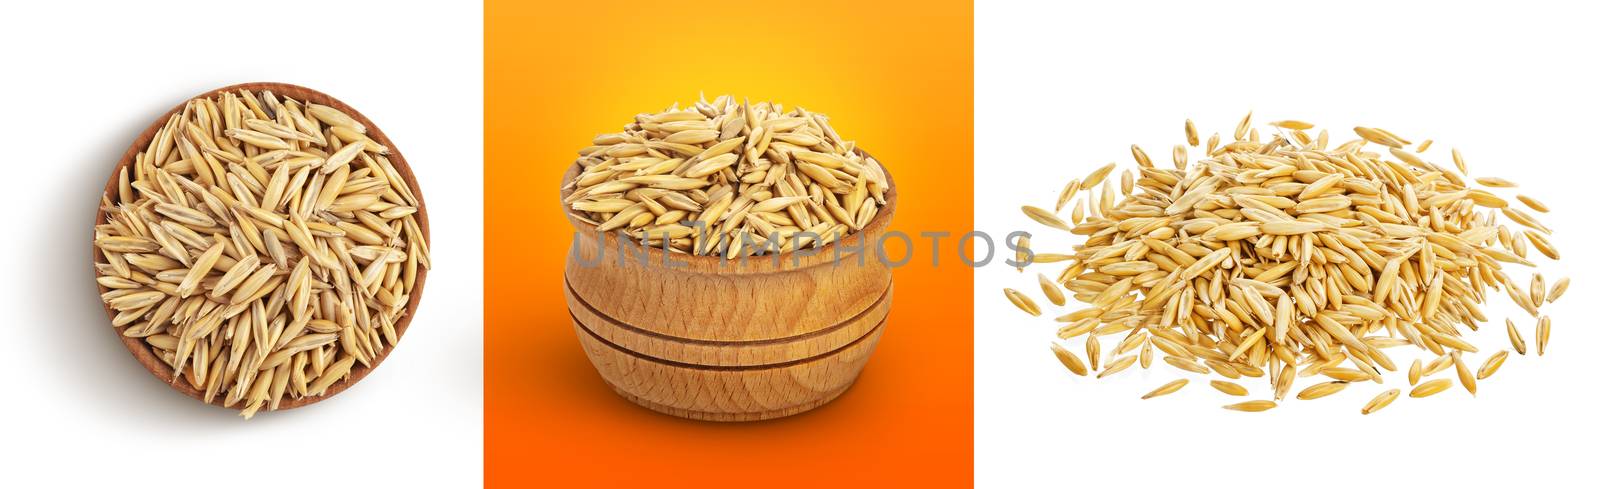 Bowl of oat seeds isolated on white background with clipping path, wheat grains